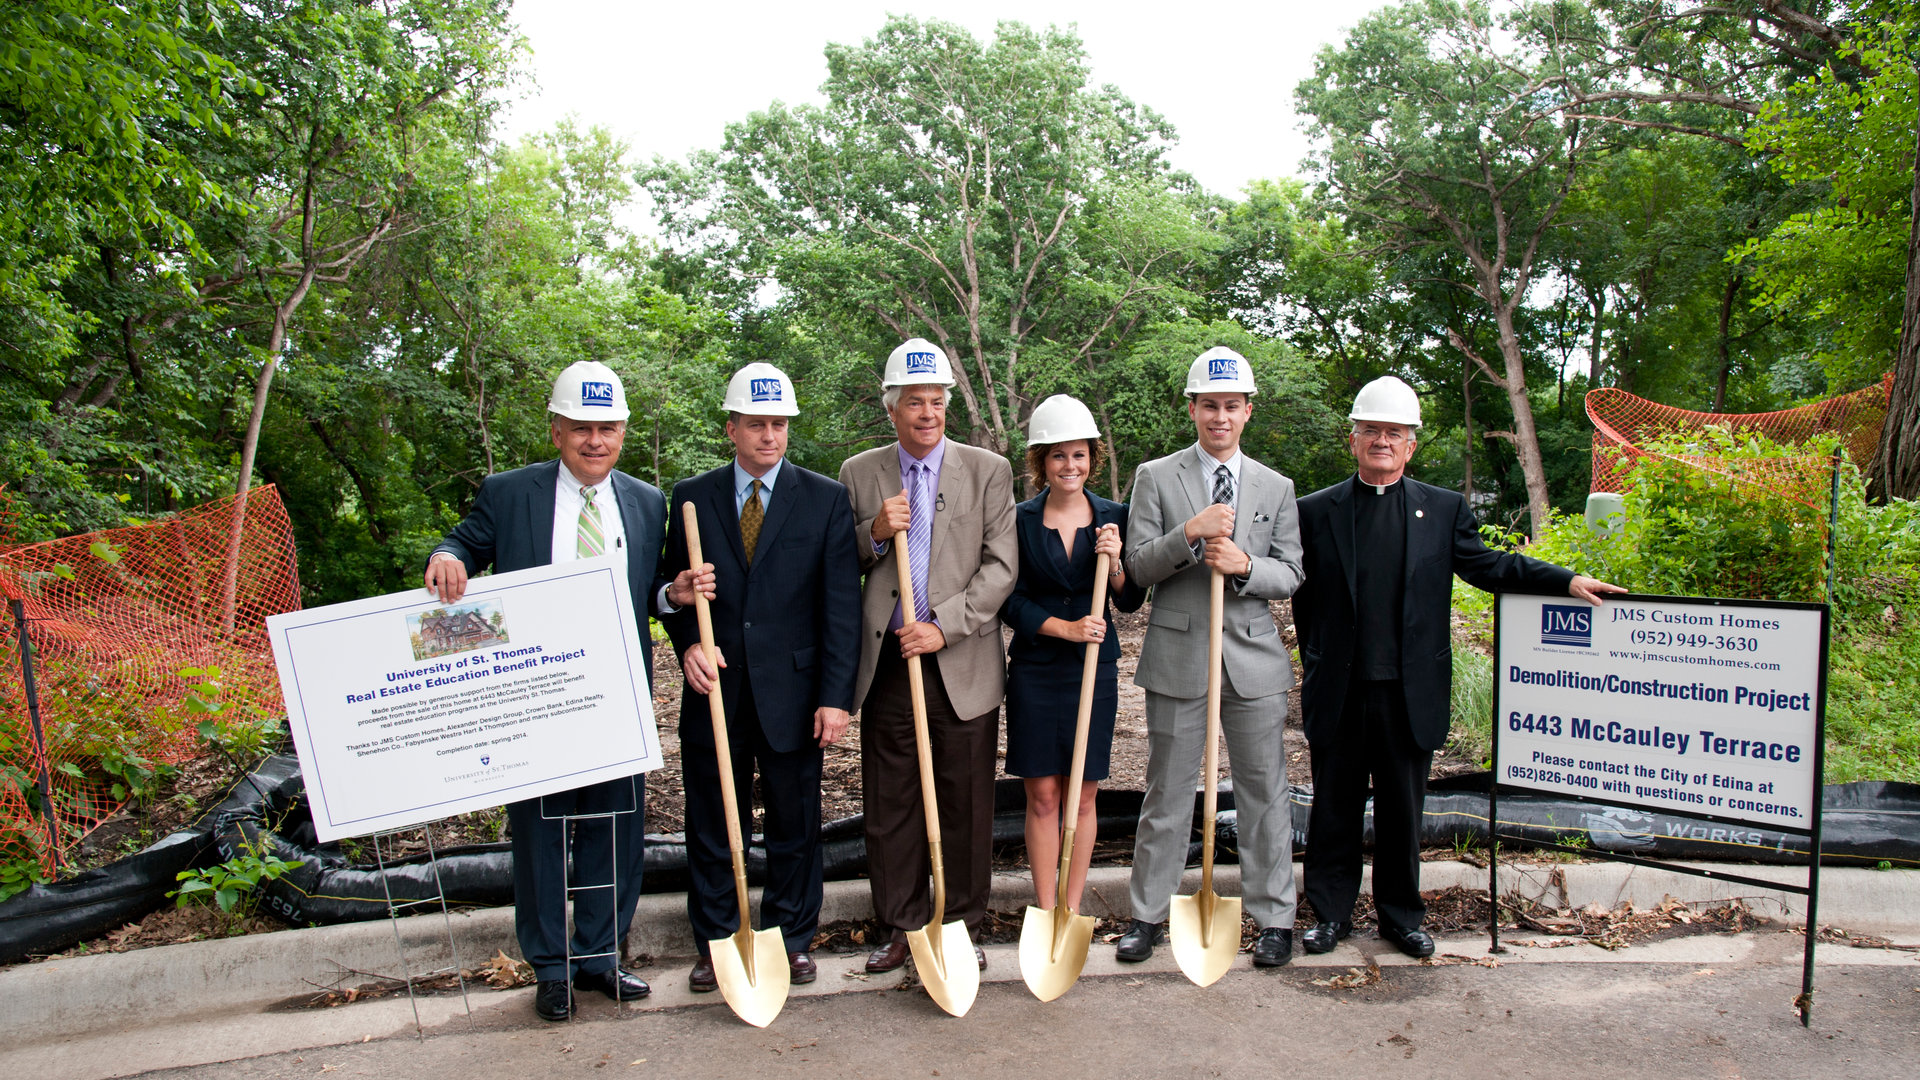 REAC members attend a groundbreaking ceremony